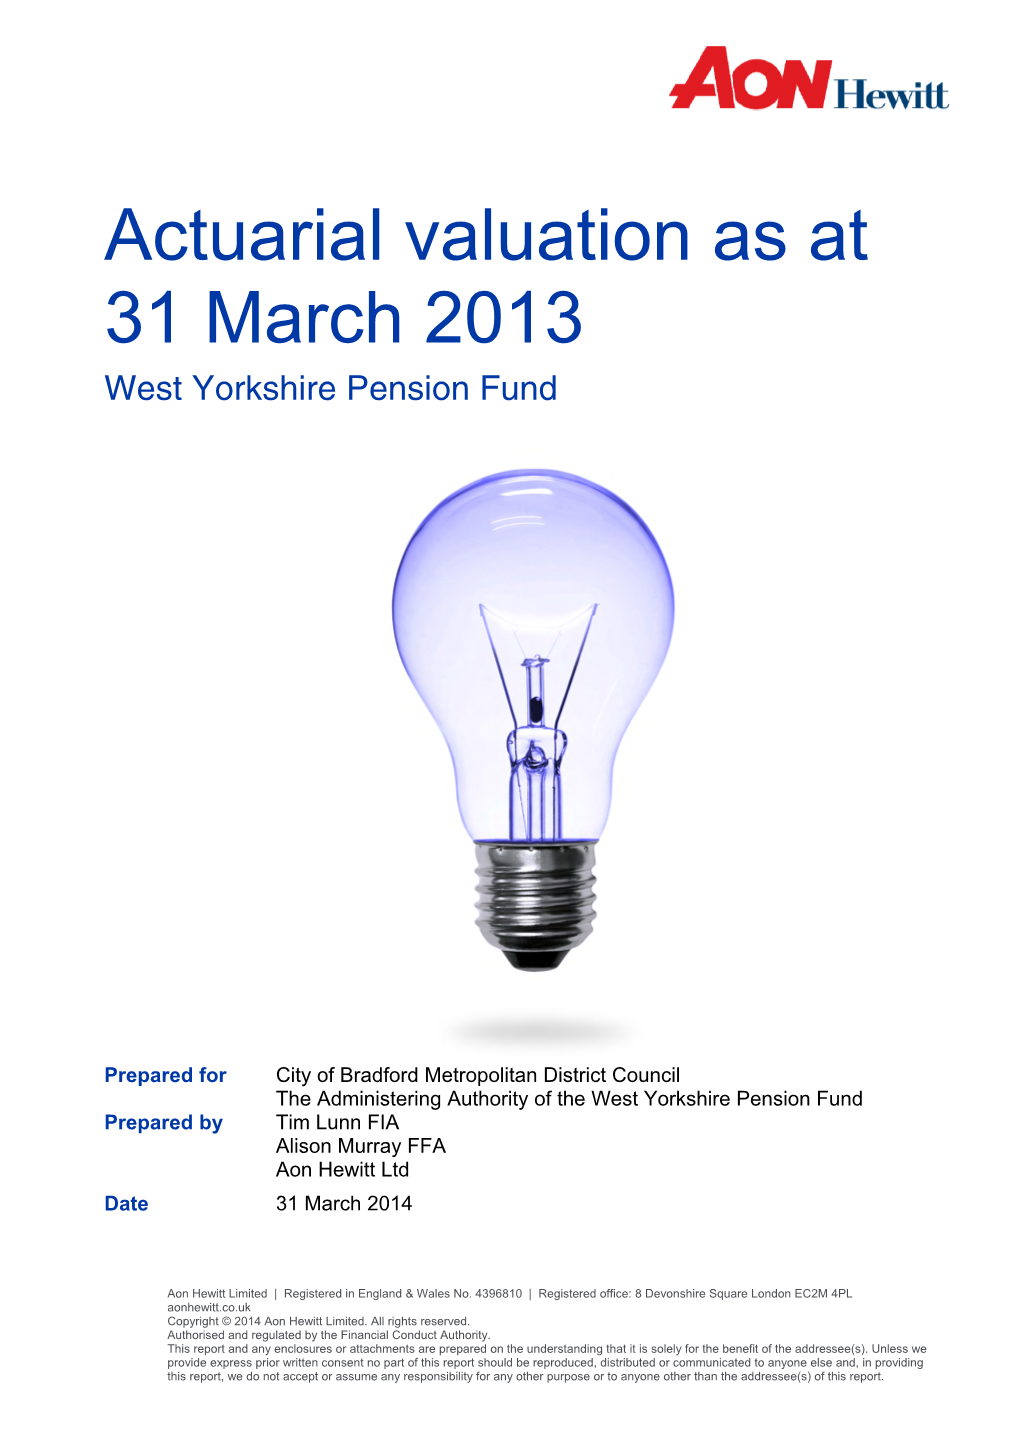 Actuarial Valuation As at 31 March 2013 West Yorkshire Pension Fund